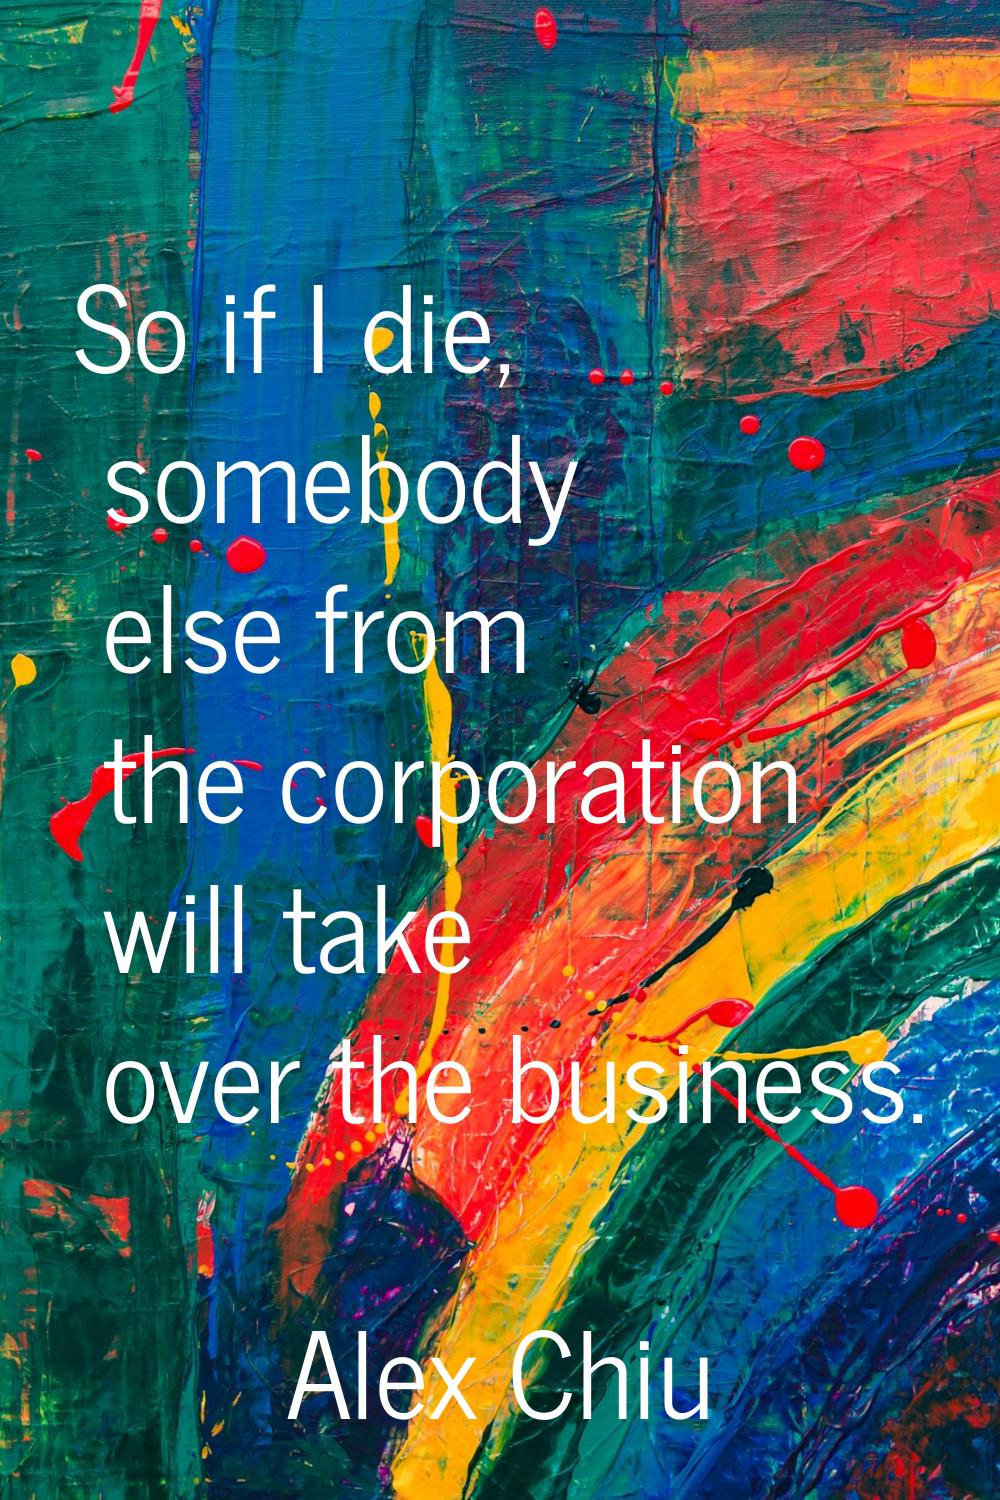 So if I die, somebody else from the corporation will take over the business.